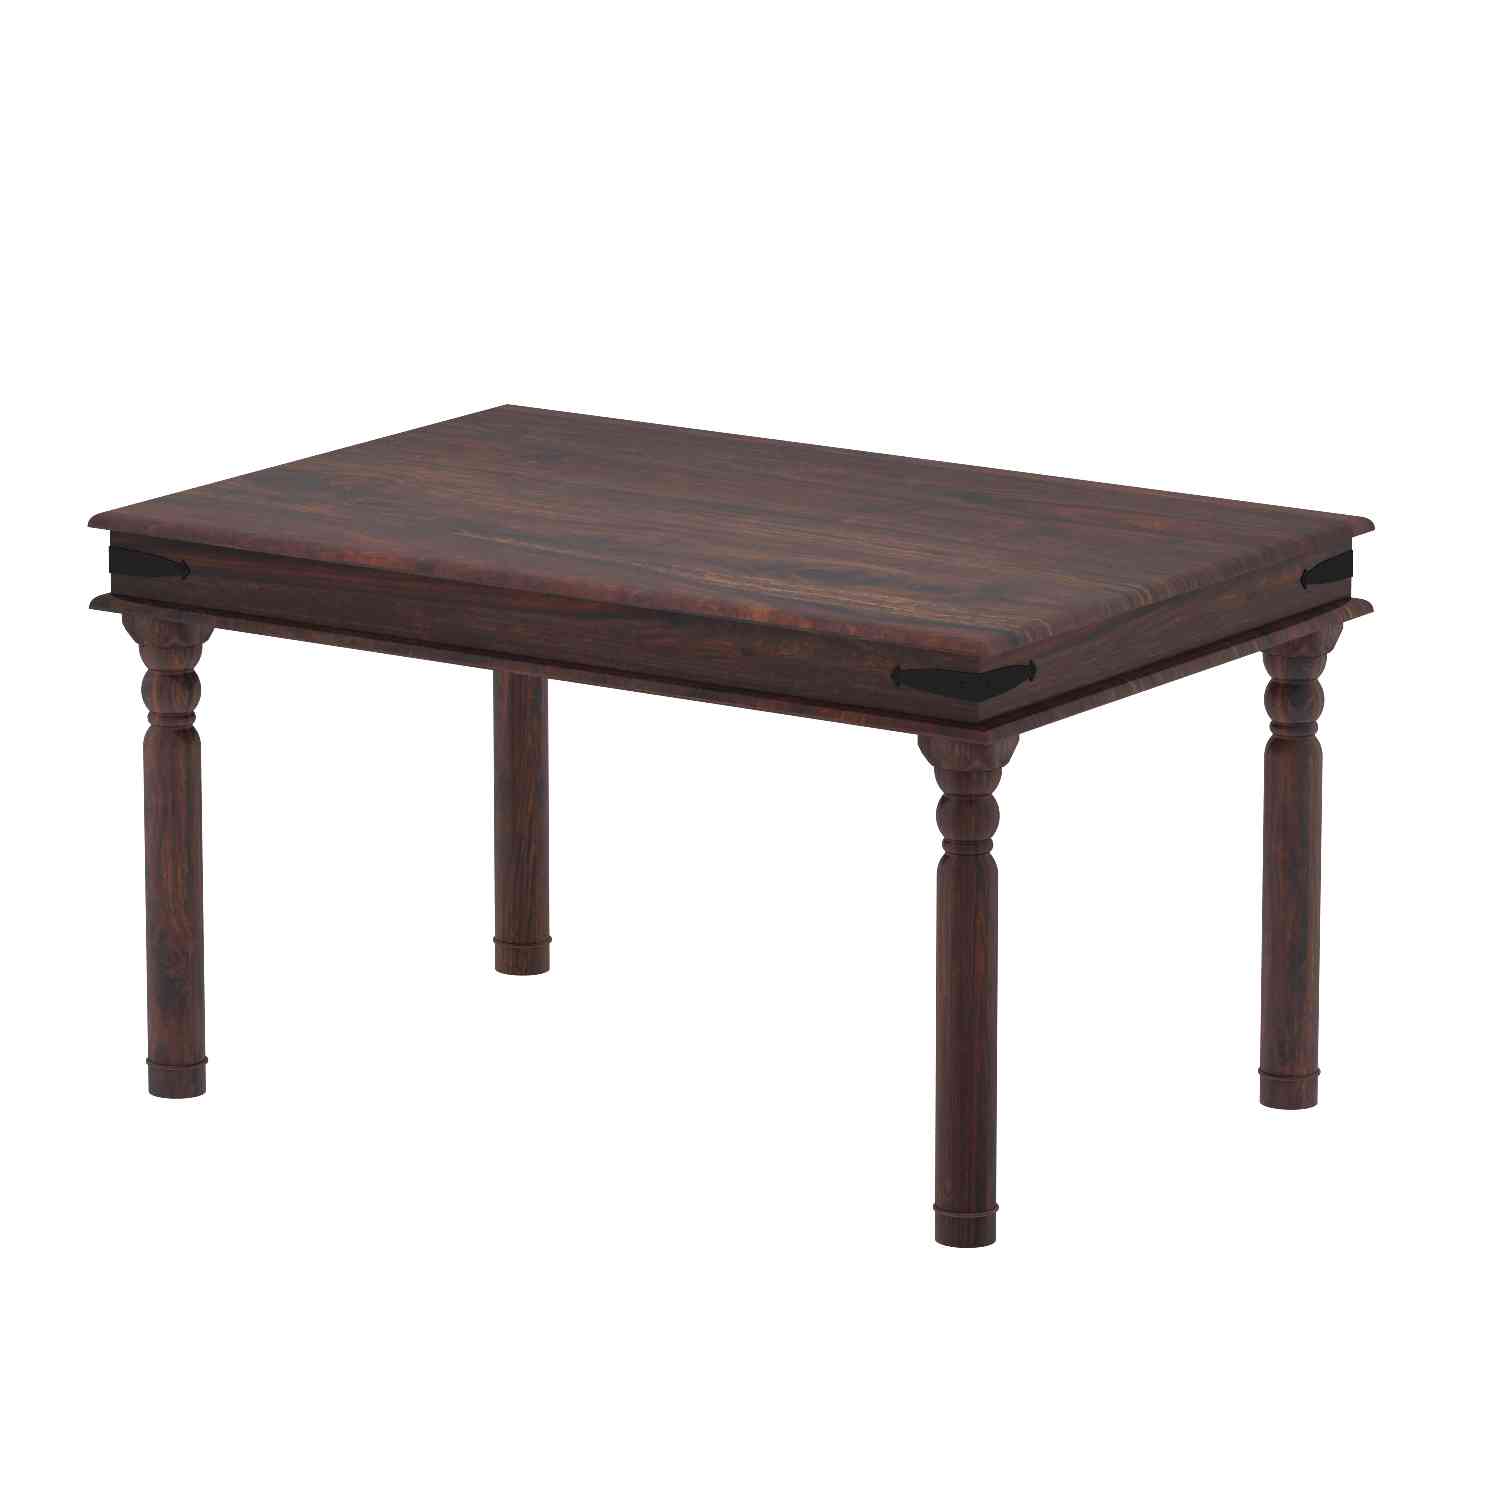 Ajmer Solid Sheesham Wood 5 Seater Dining Set With Bench (With Cushion, Walnut Finish)